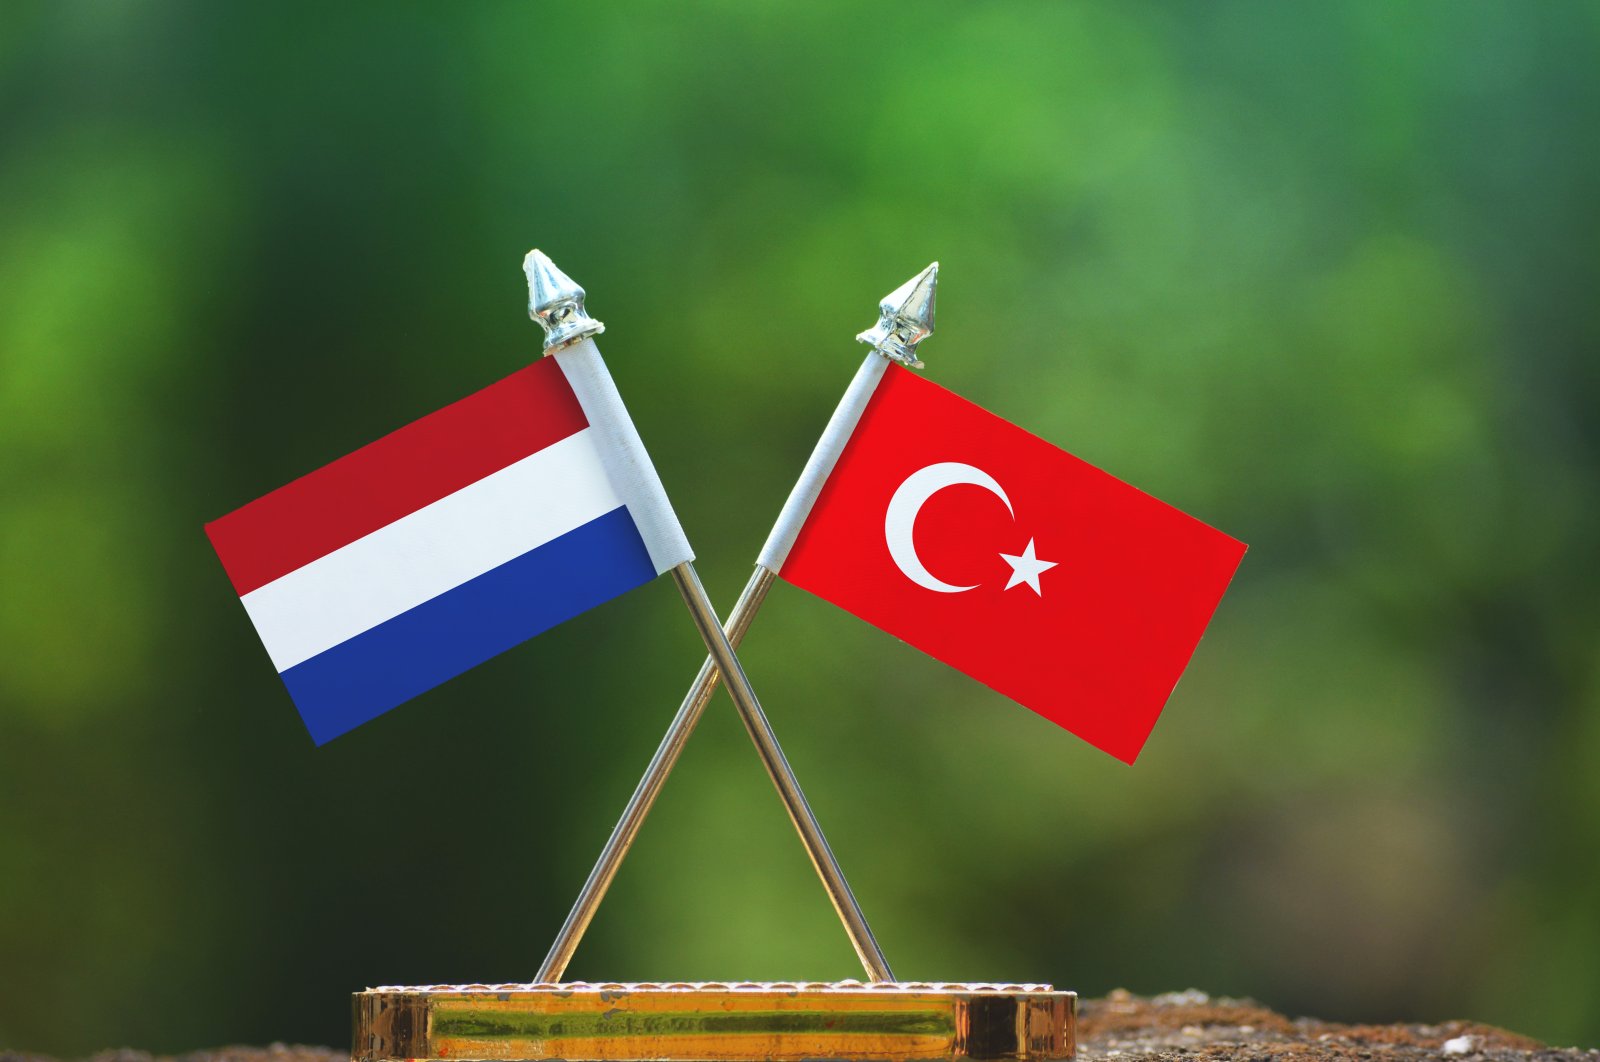 The flags of the Netherlands and Turkey are seen together in this undated file photo. (Shutterstock Photo)